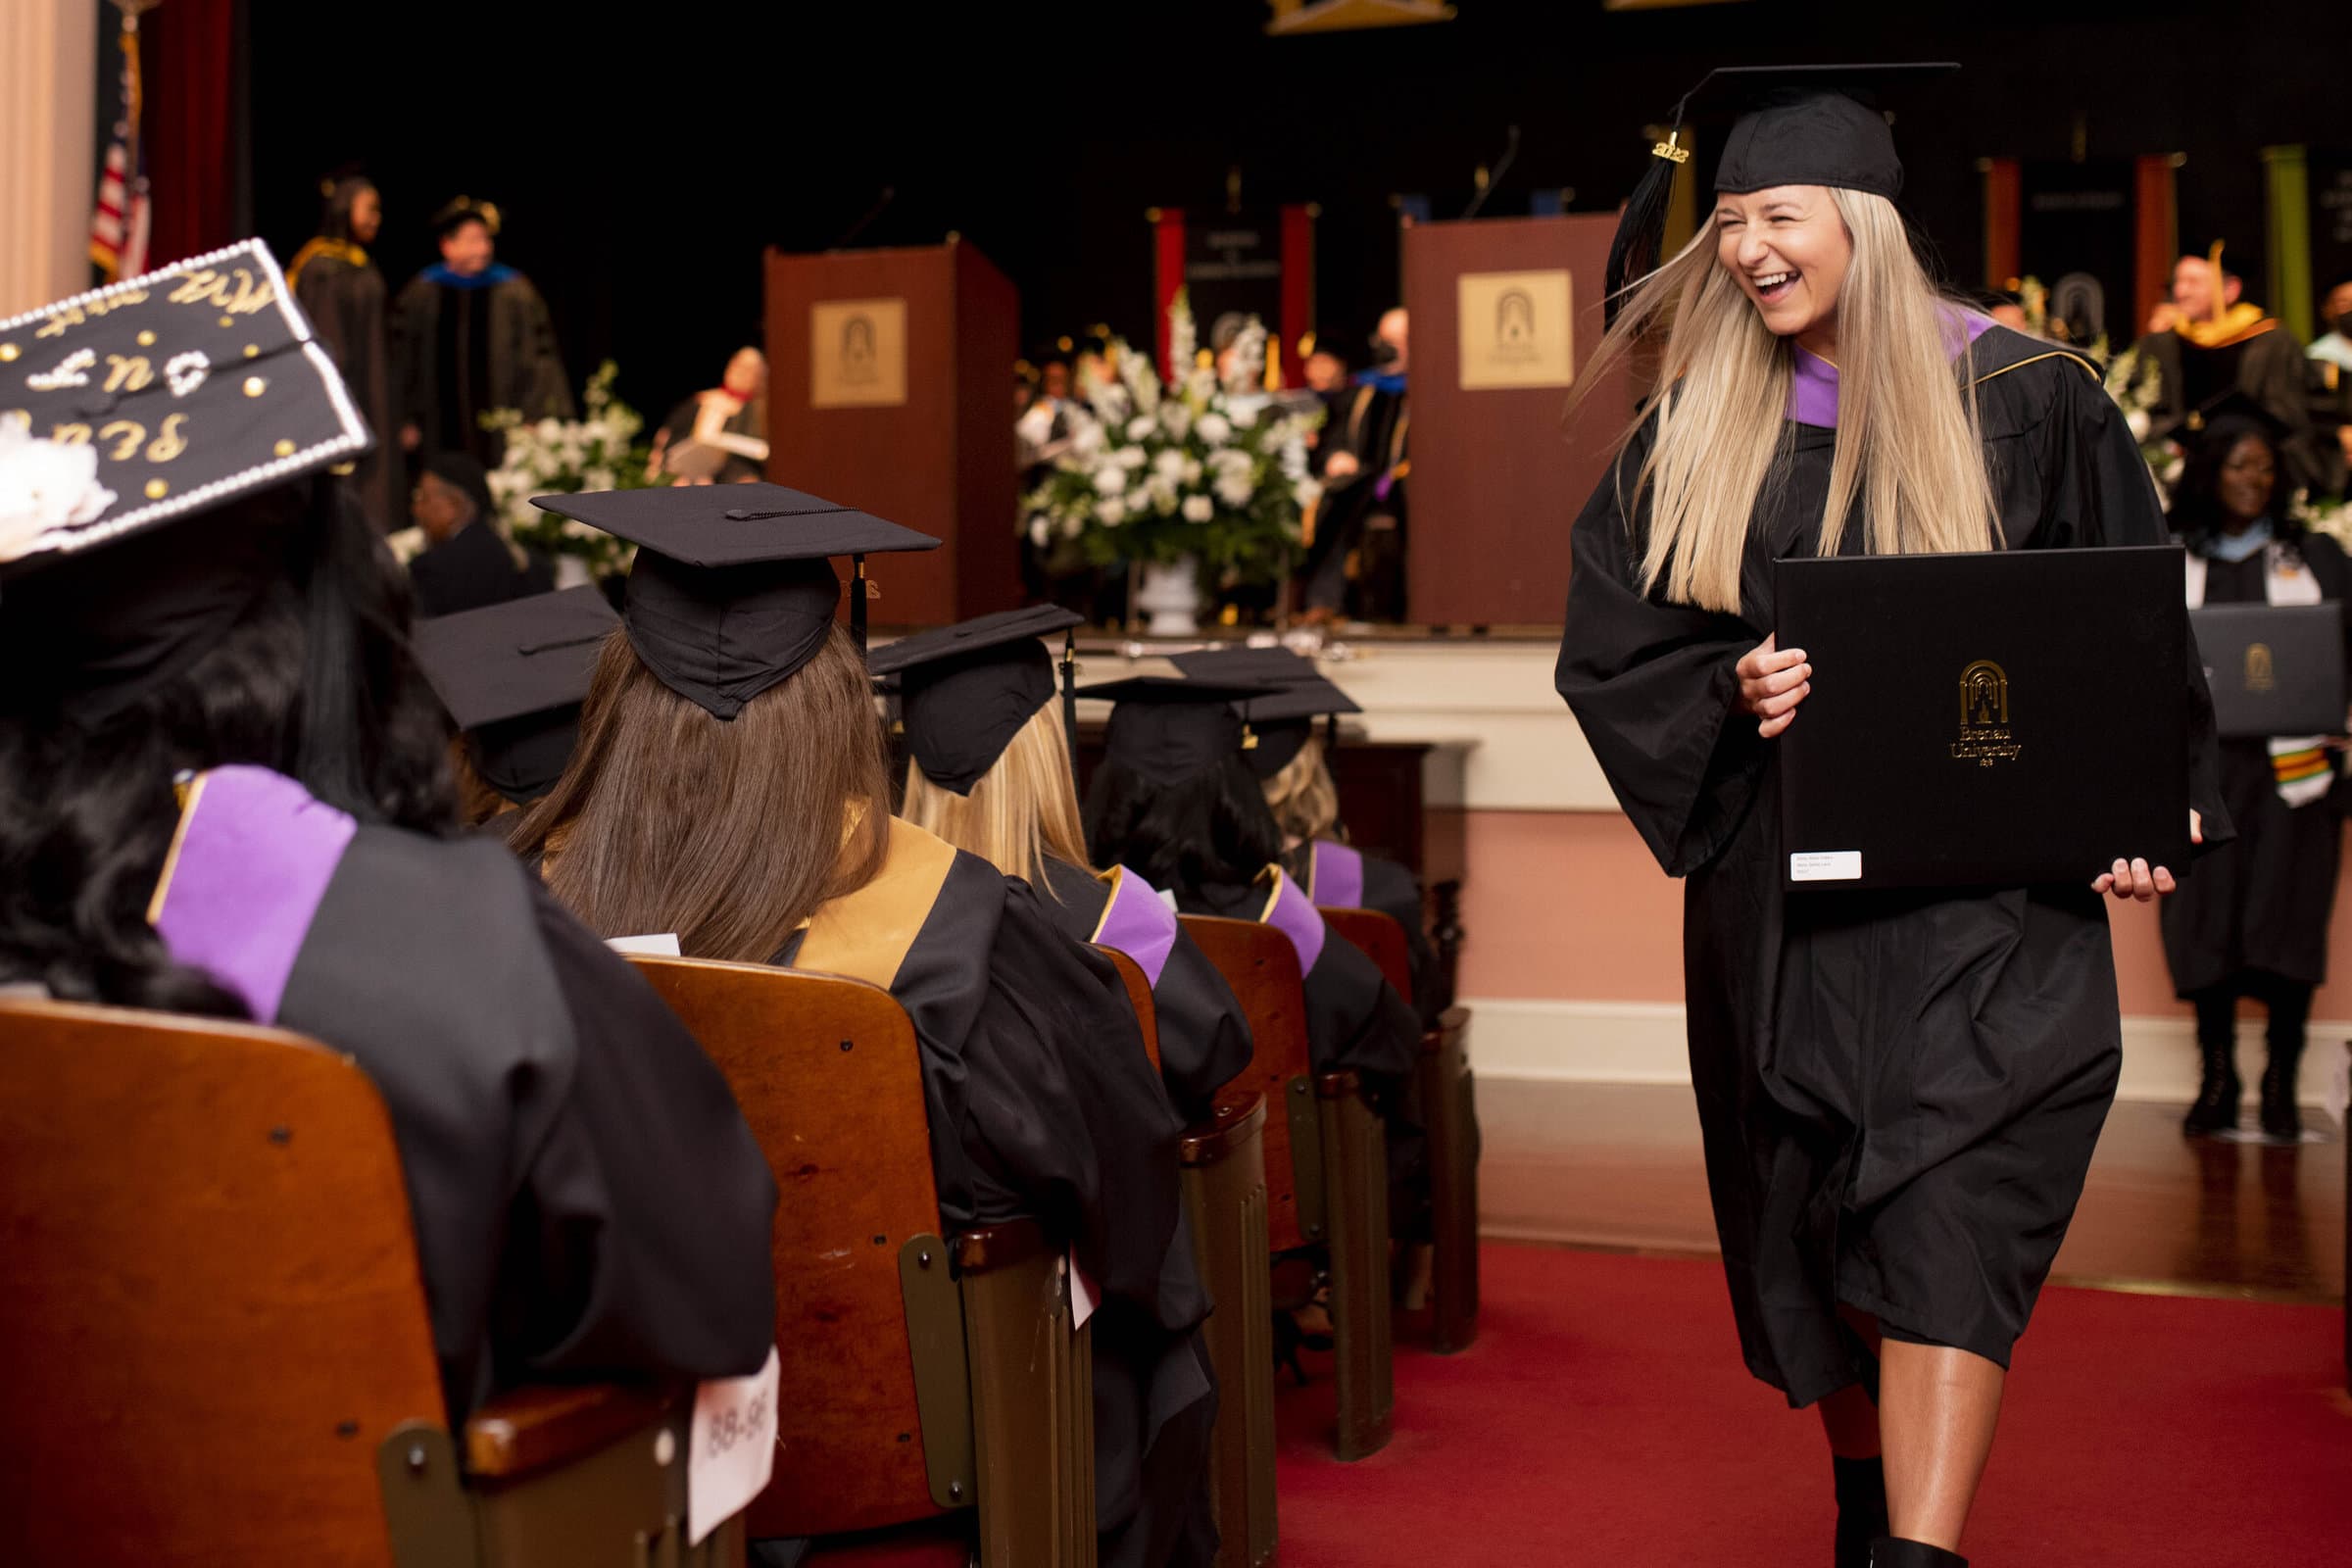 A graduate student smiles at her fellow graduates as she returns to her seat with her diploma.